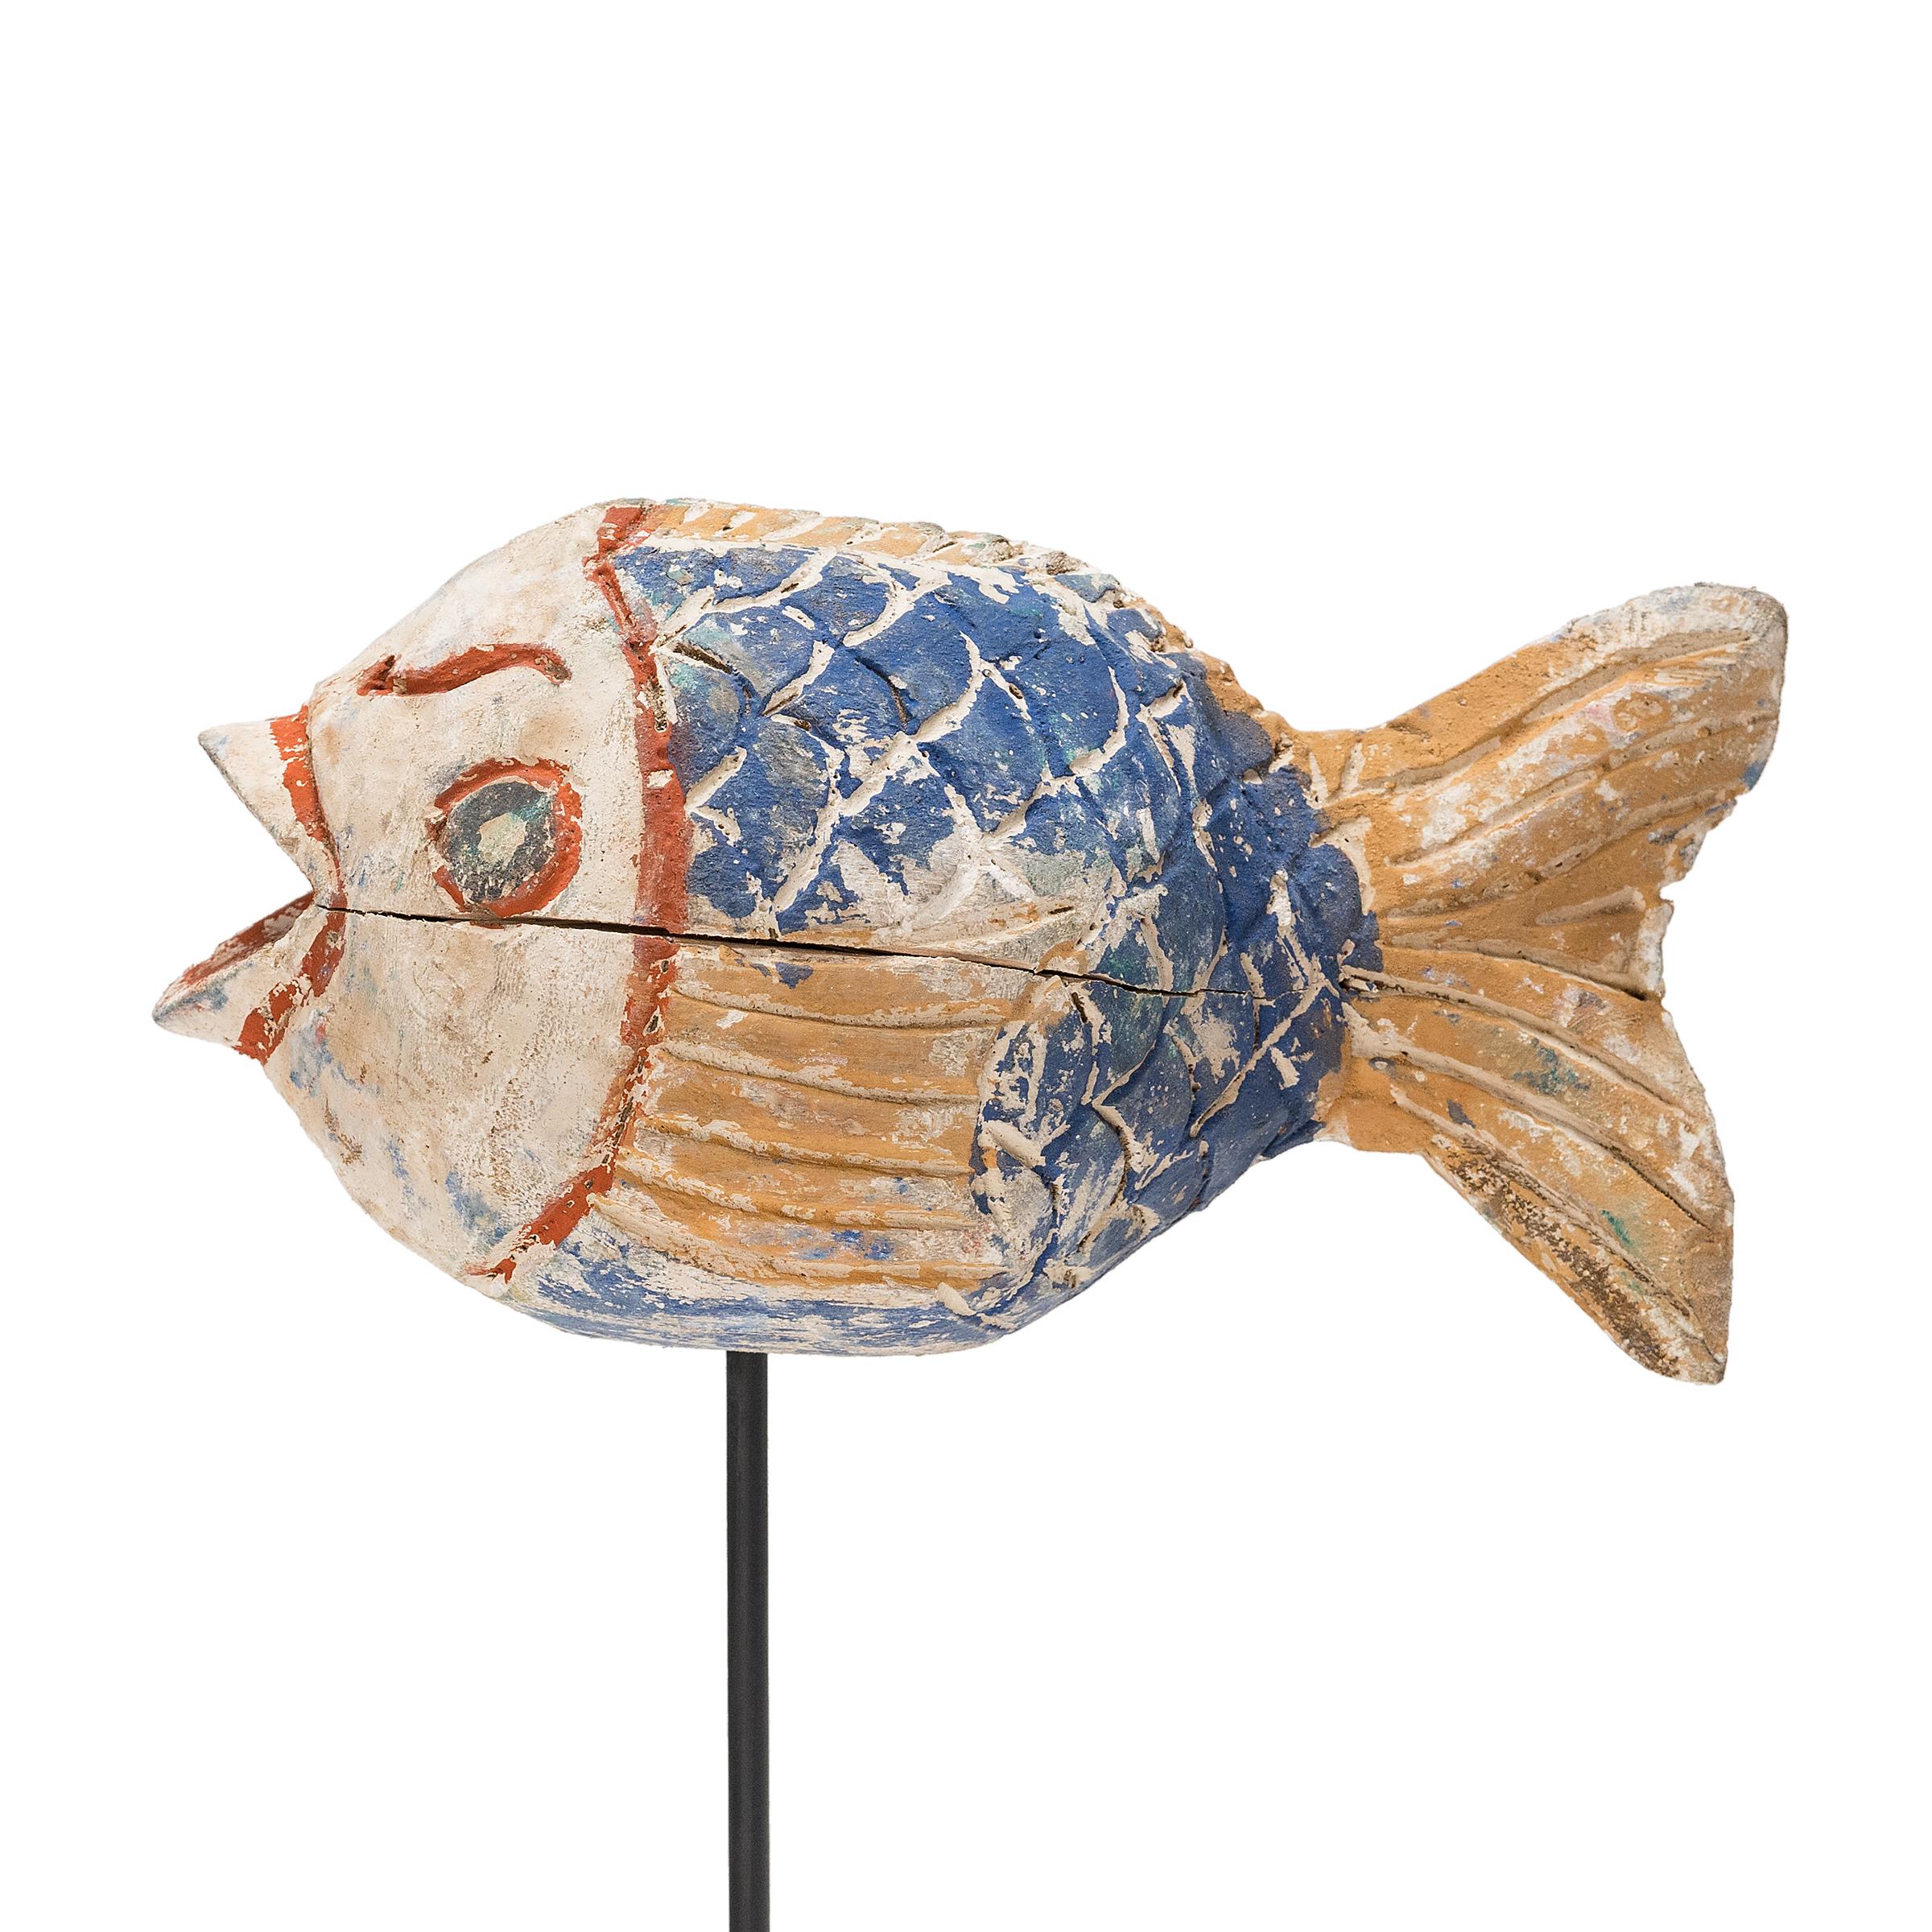 Hand-crafted from reclaimed wood, this artisanal koi sculpture is a traditional symbol of harmony and luck. For Buddhists, such a fish represents a freedom from all restraints. And because fish are reputed to swim in pairs, two fish paired together